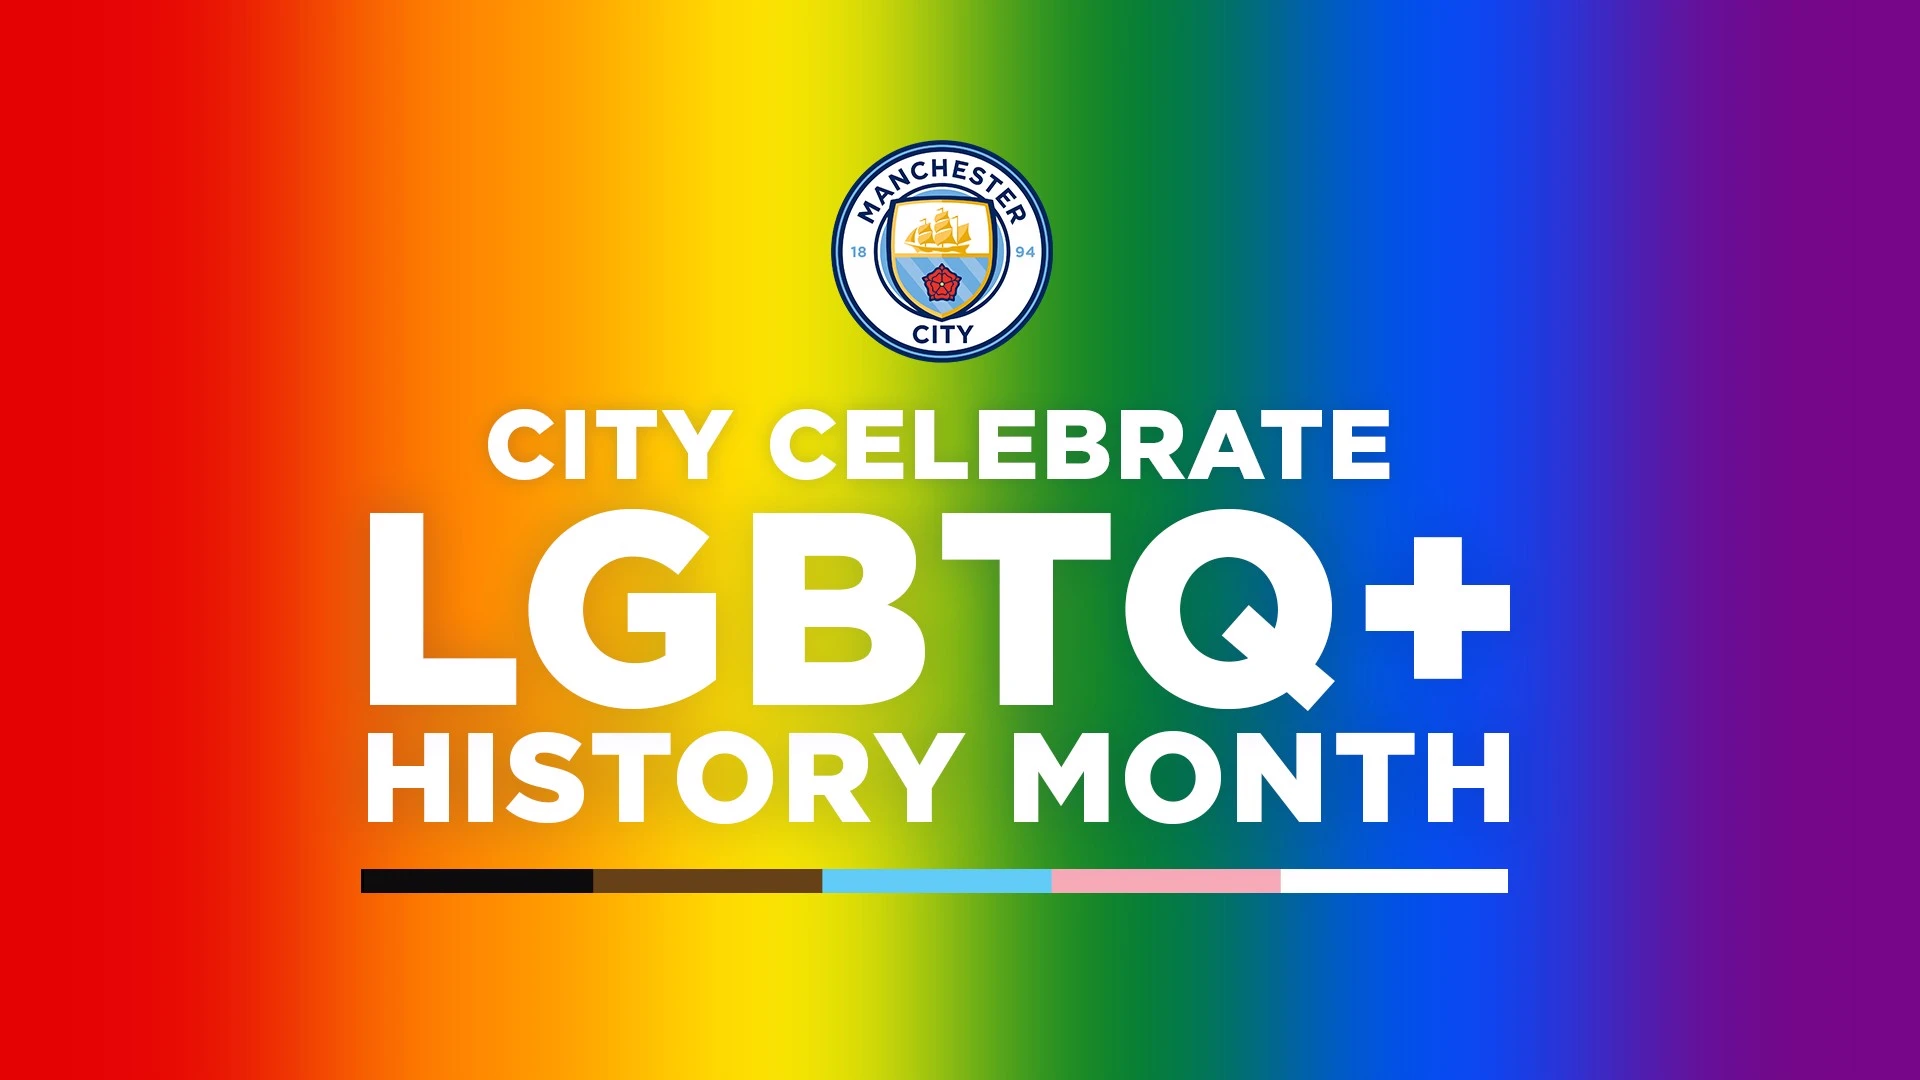 Does Man City Support LGBTQ? Image Credits:- Manchester City.